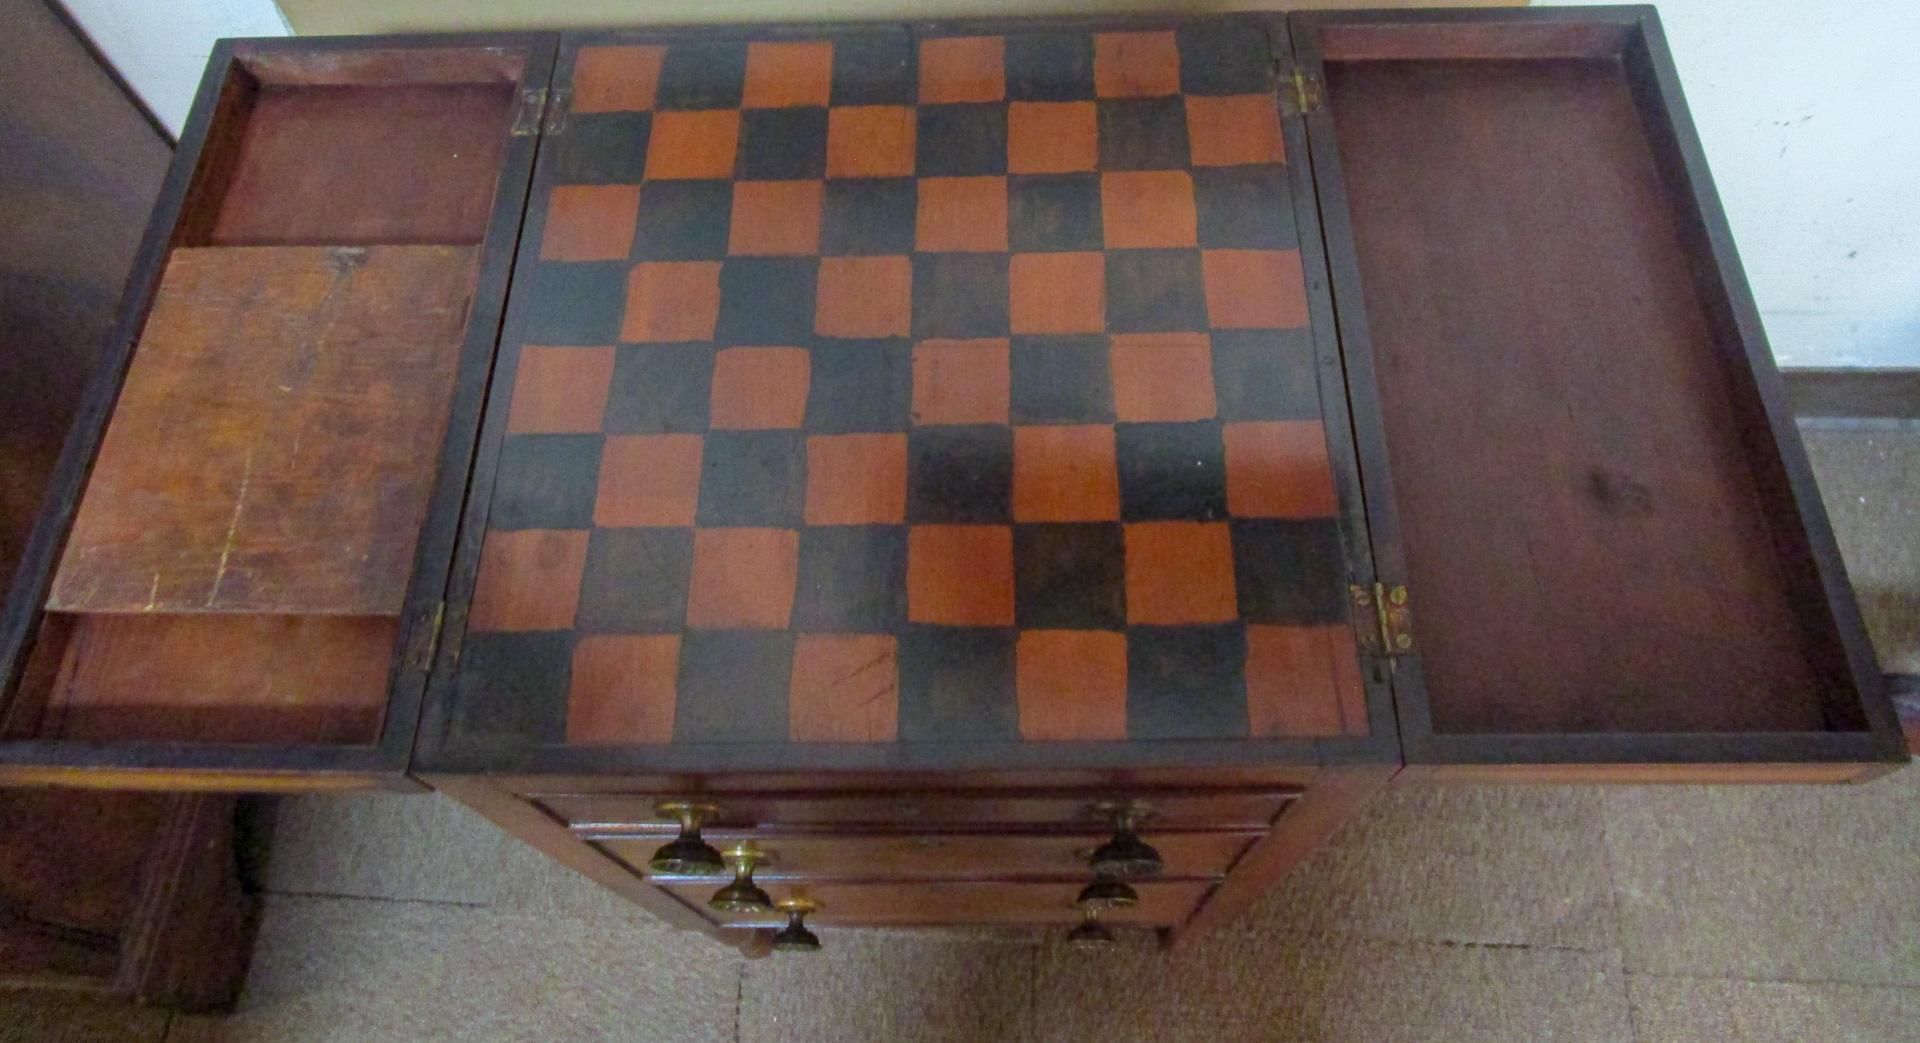 This unique petite size game table features three graduated sized drawers retaining the original brass fleurette motif pulls and a double hinged top that opens to a checkerboard. One of the folding sides contains a slider that stores game pieces and